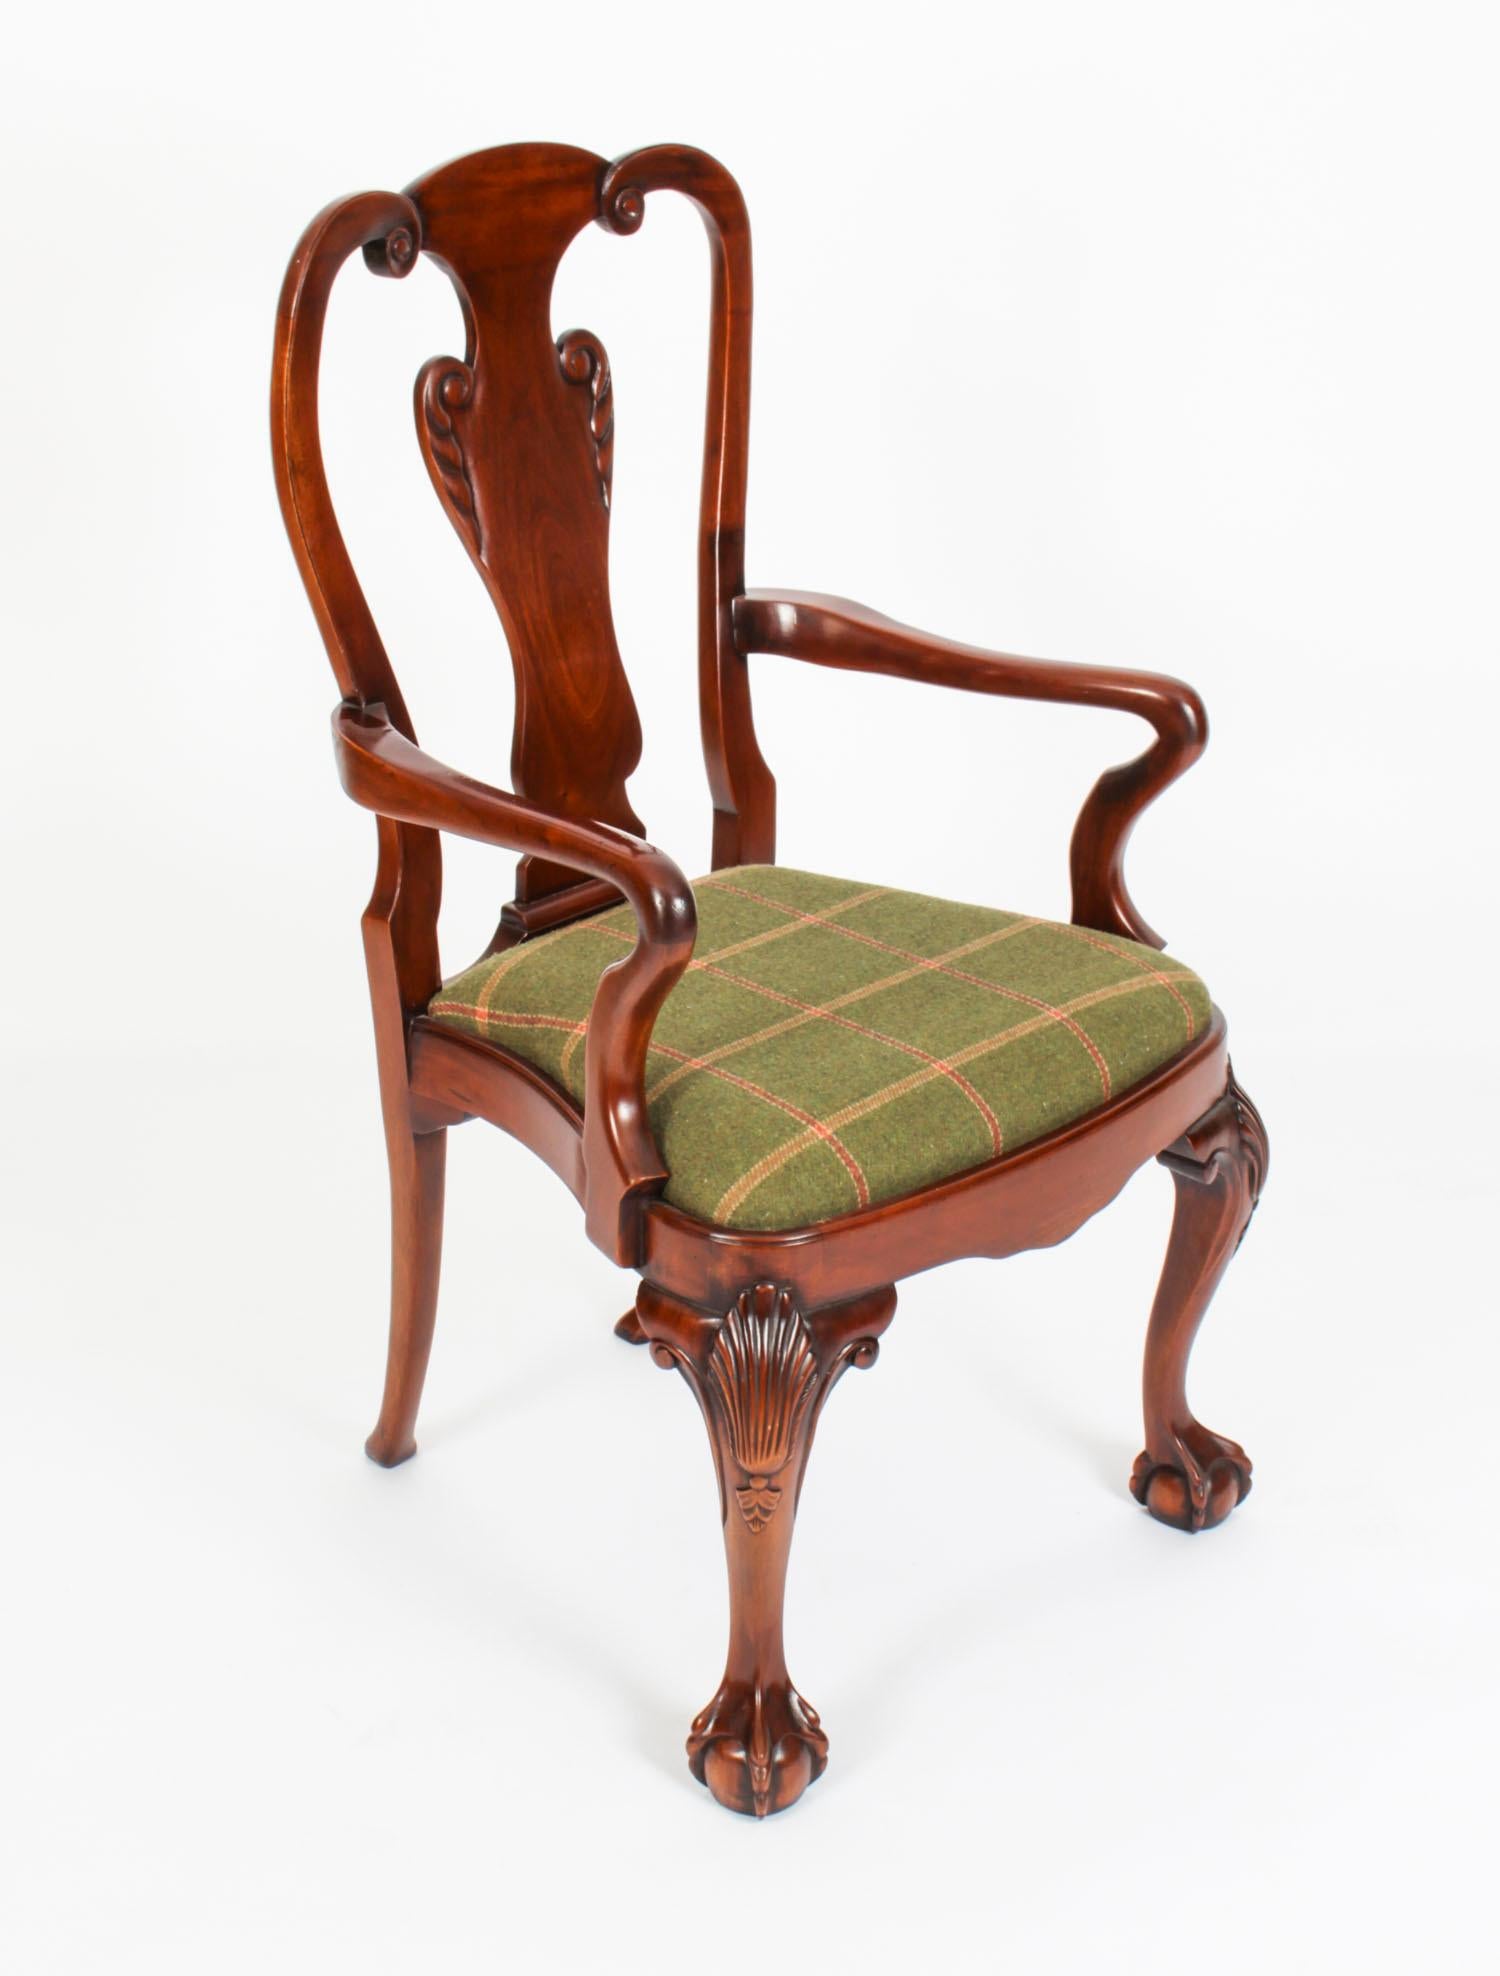 An absolutely fantastic set of twelve vintage Queen Anne Revival dining chairs, dating from the mid 20th century.

The set comprises ten side chairs and a pair of armchairs. They have been masterfully crafted in beautiful solid mahogany and the